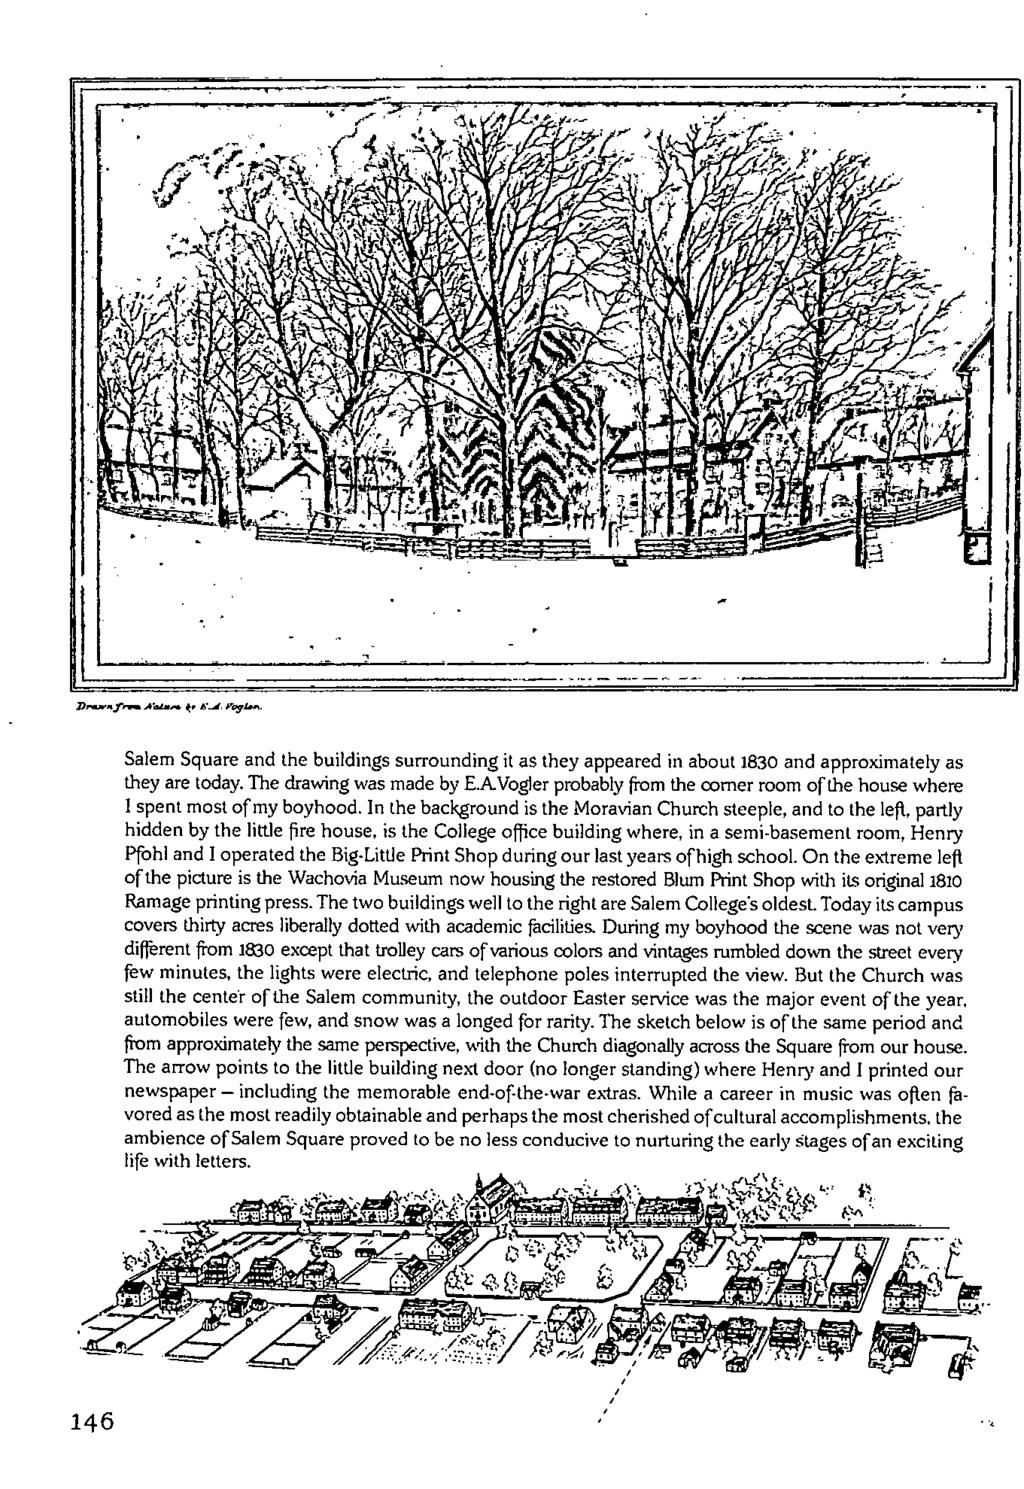 A., S_t Pogt.. Salem Square and the buildings surrounding it as they appeared in about 1830 and approximately as they are today. The thawing was made by E.